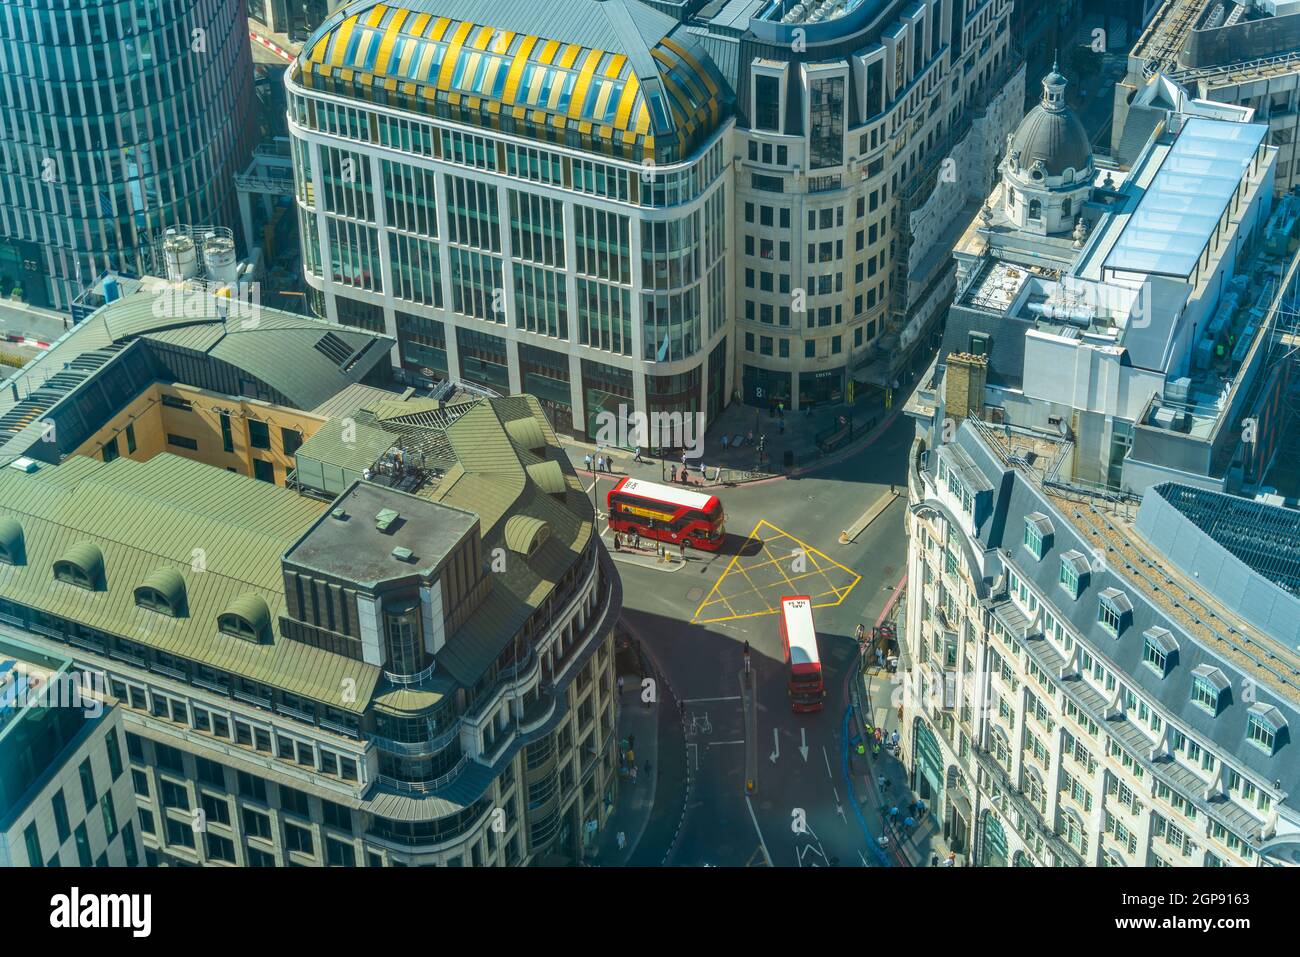 Aerial view of red bus in the City and neighbouring buildings, London, England, United Kingdom, Europe Stock Photo